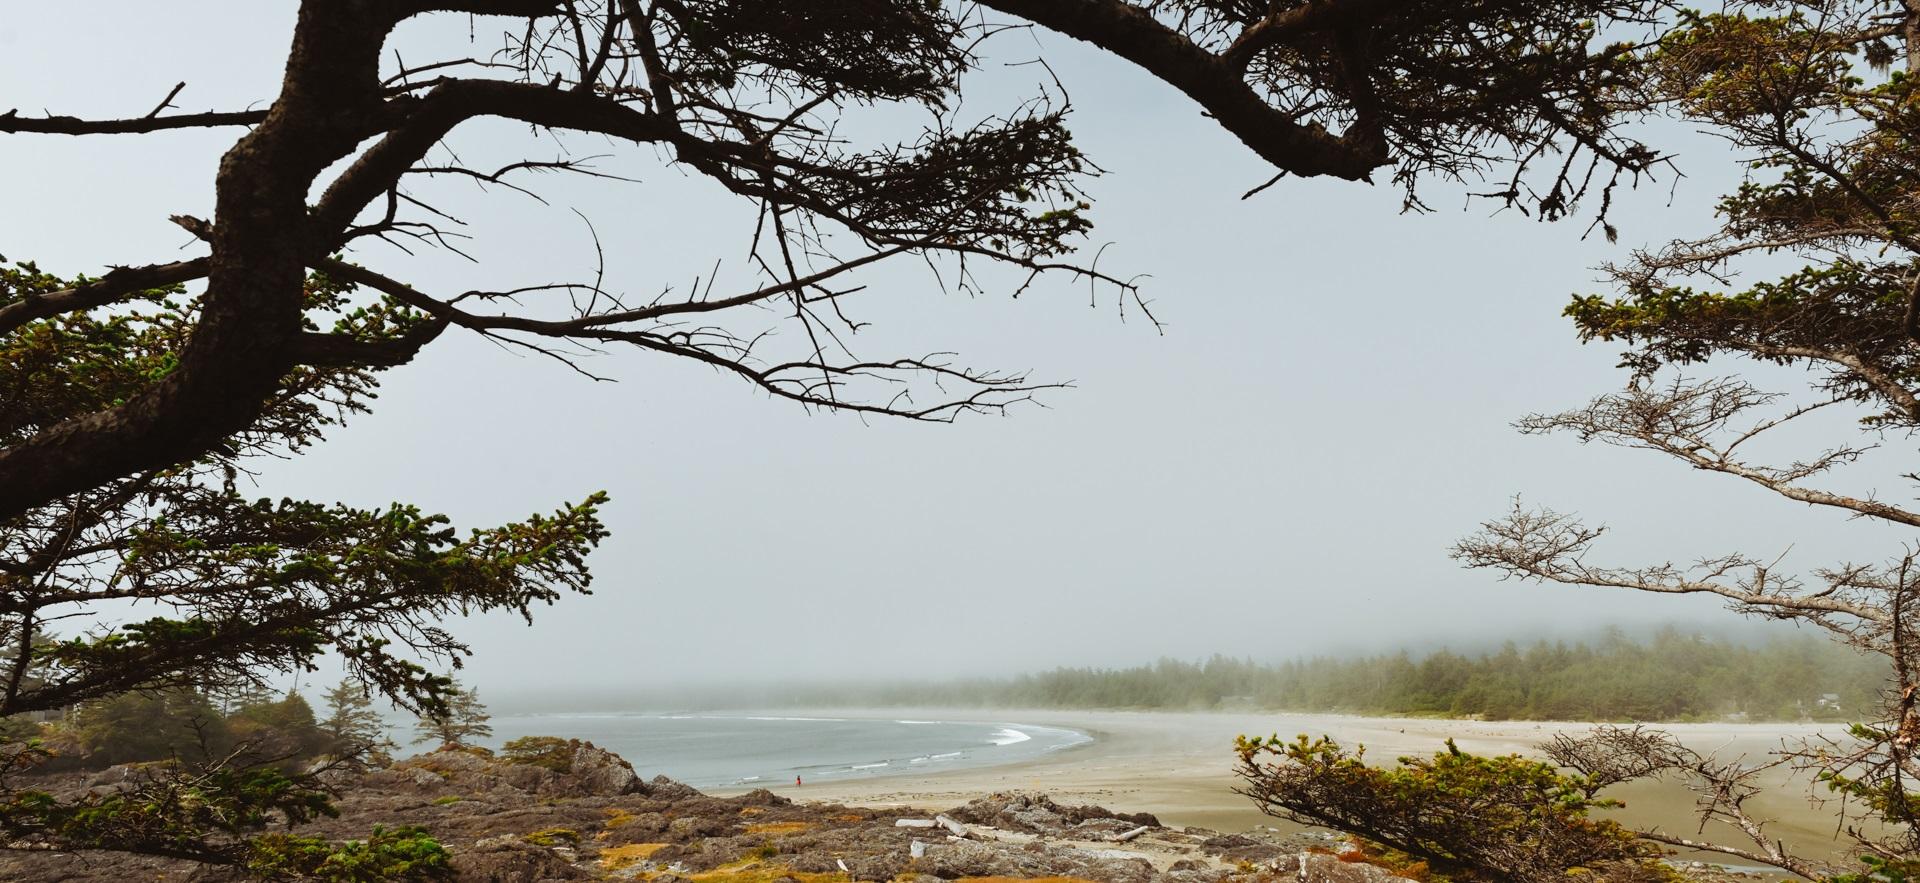 Jess' photo of tree with beach in background in Tofino